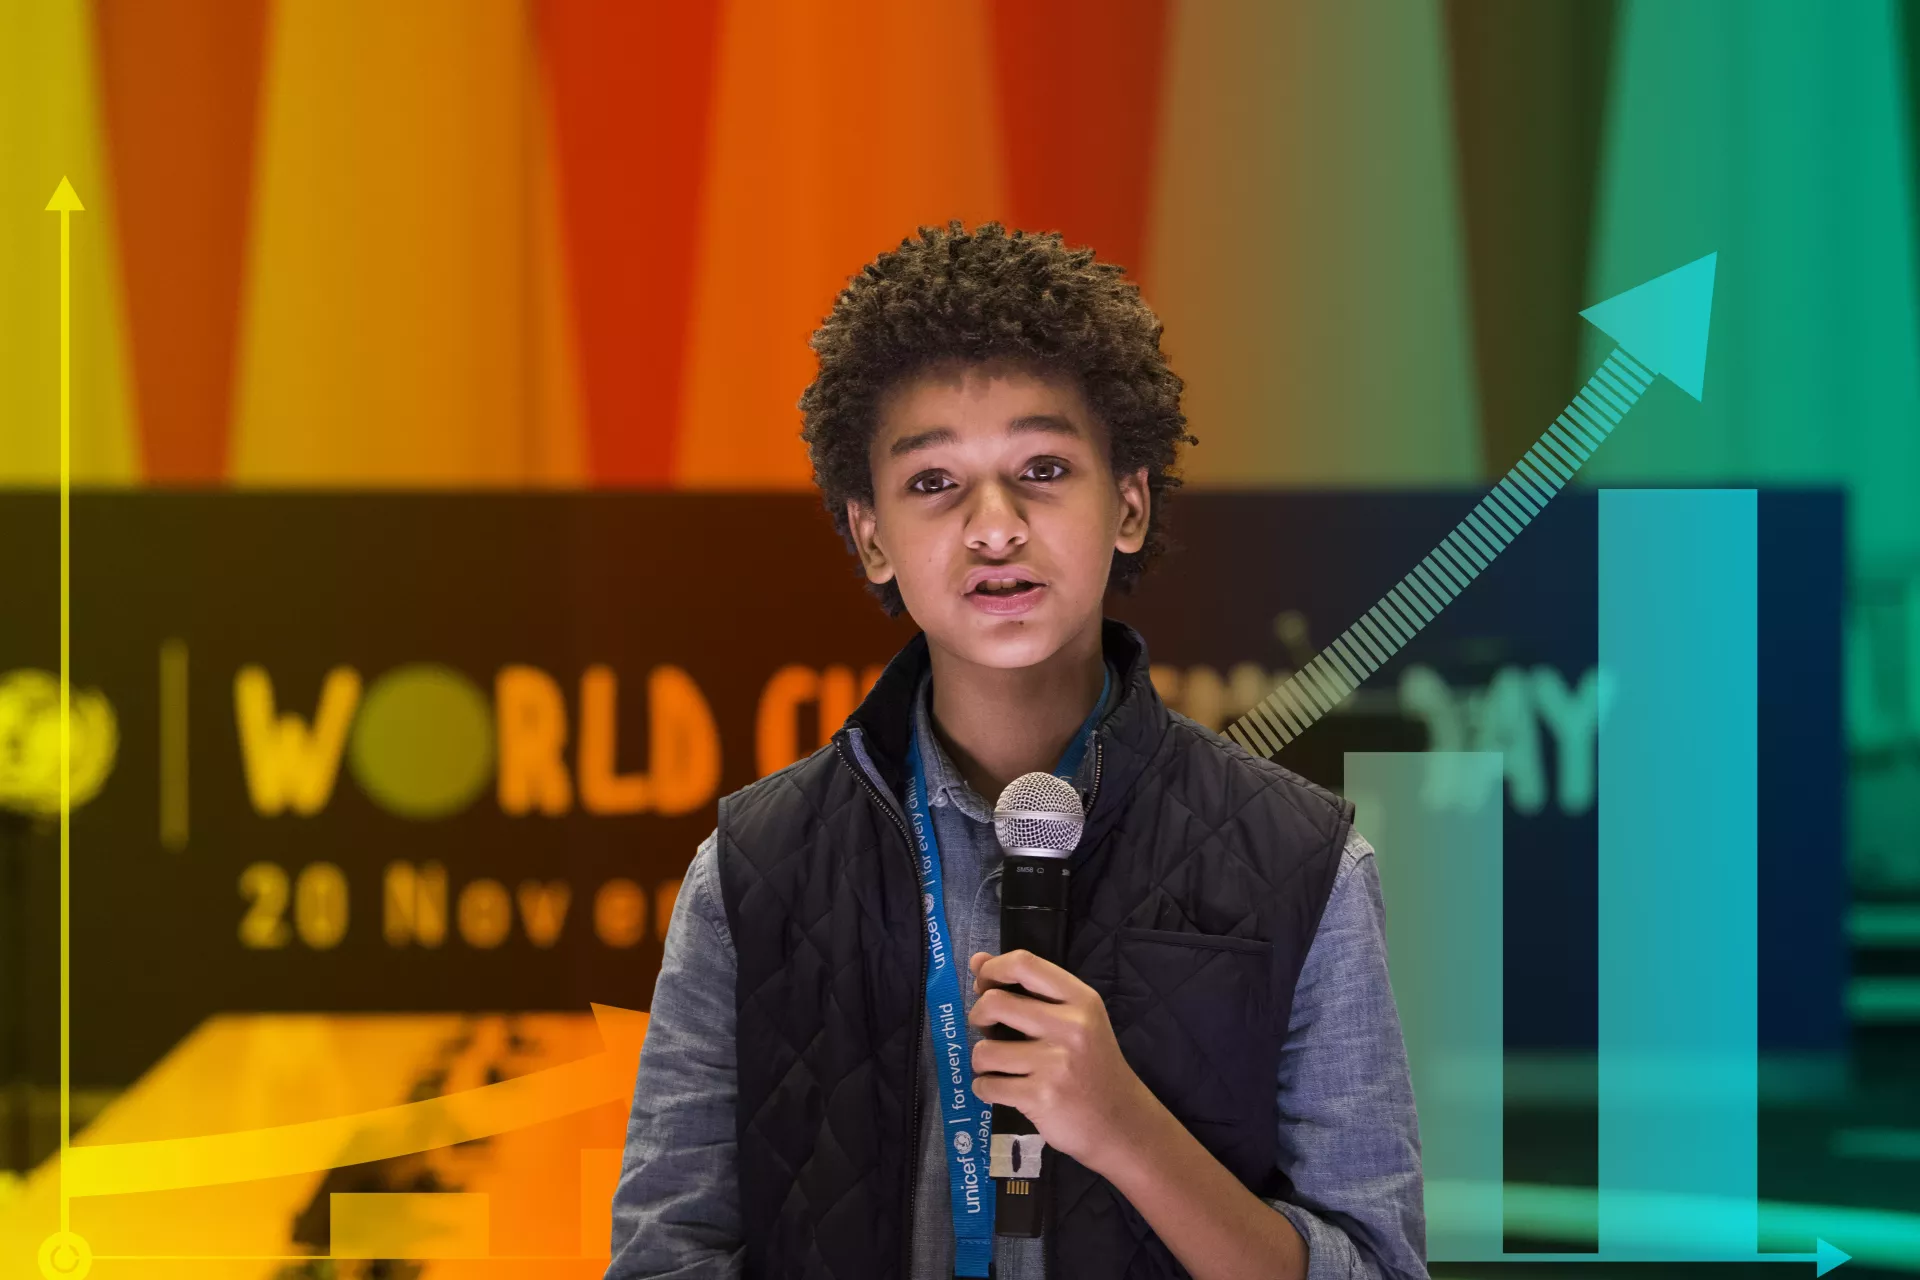 Jaden Michael, a young actor, speaks into a microphone at an event for World Children’s Day.